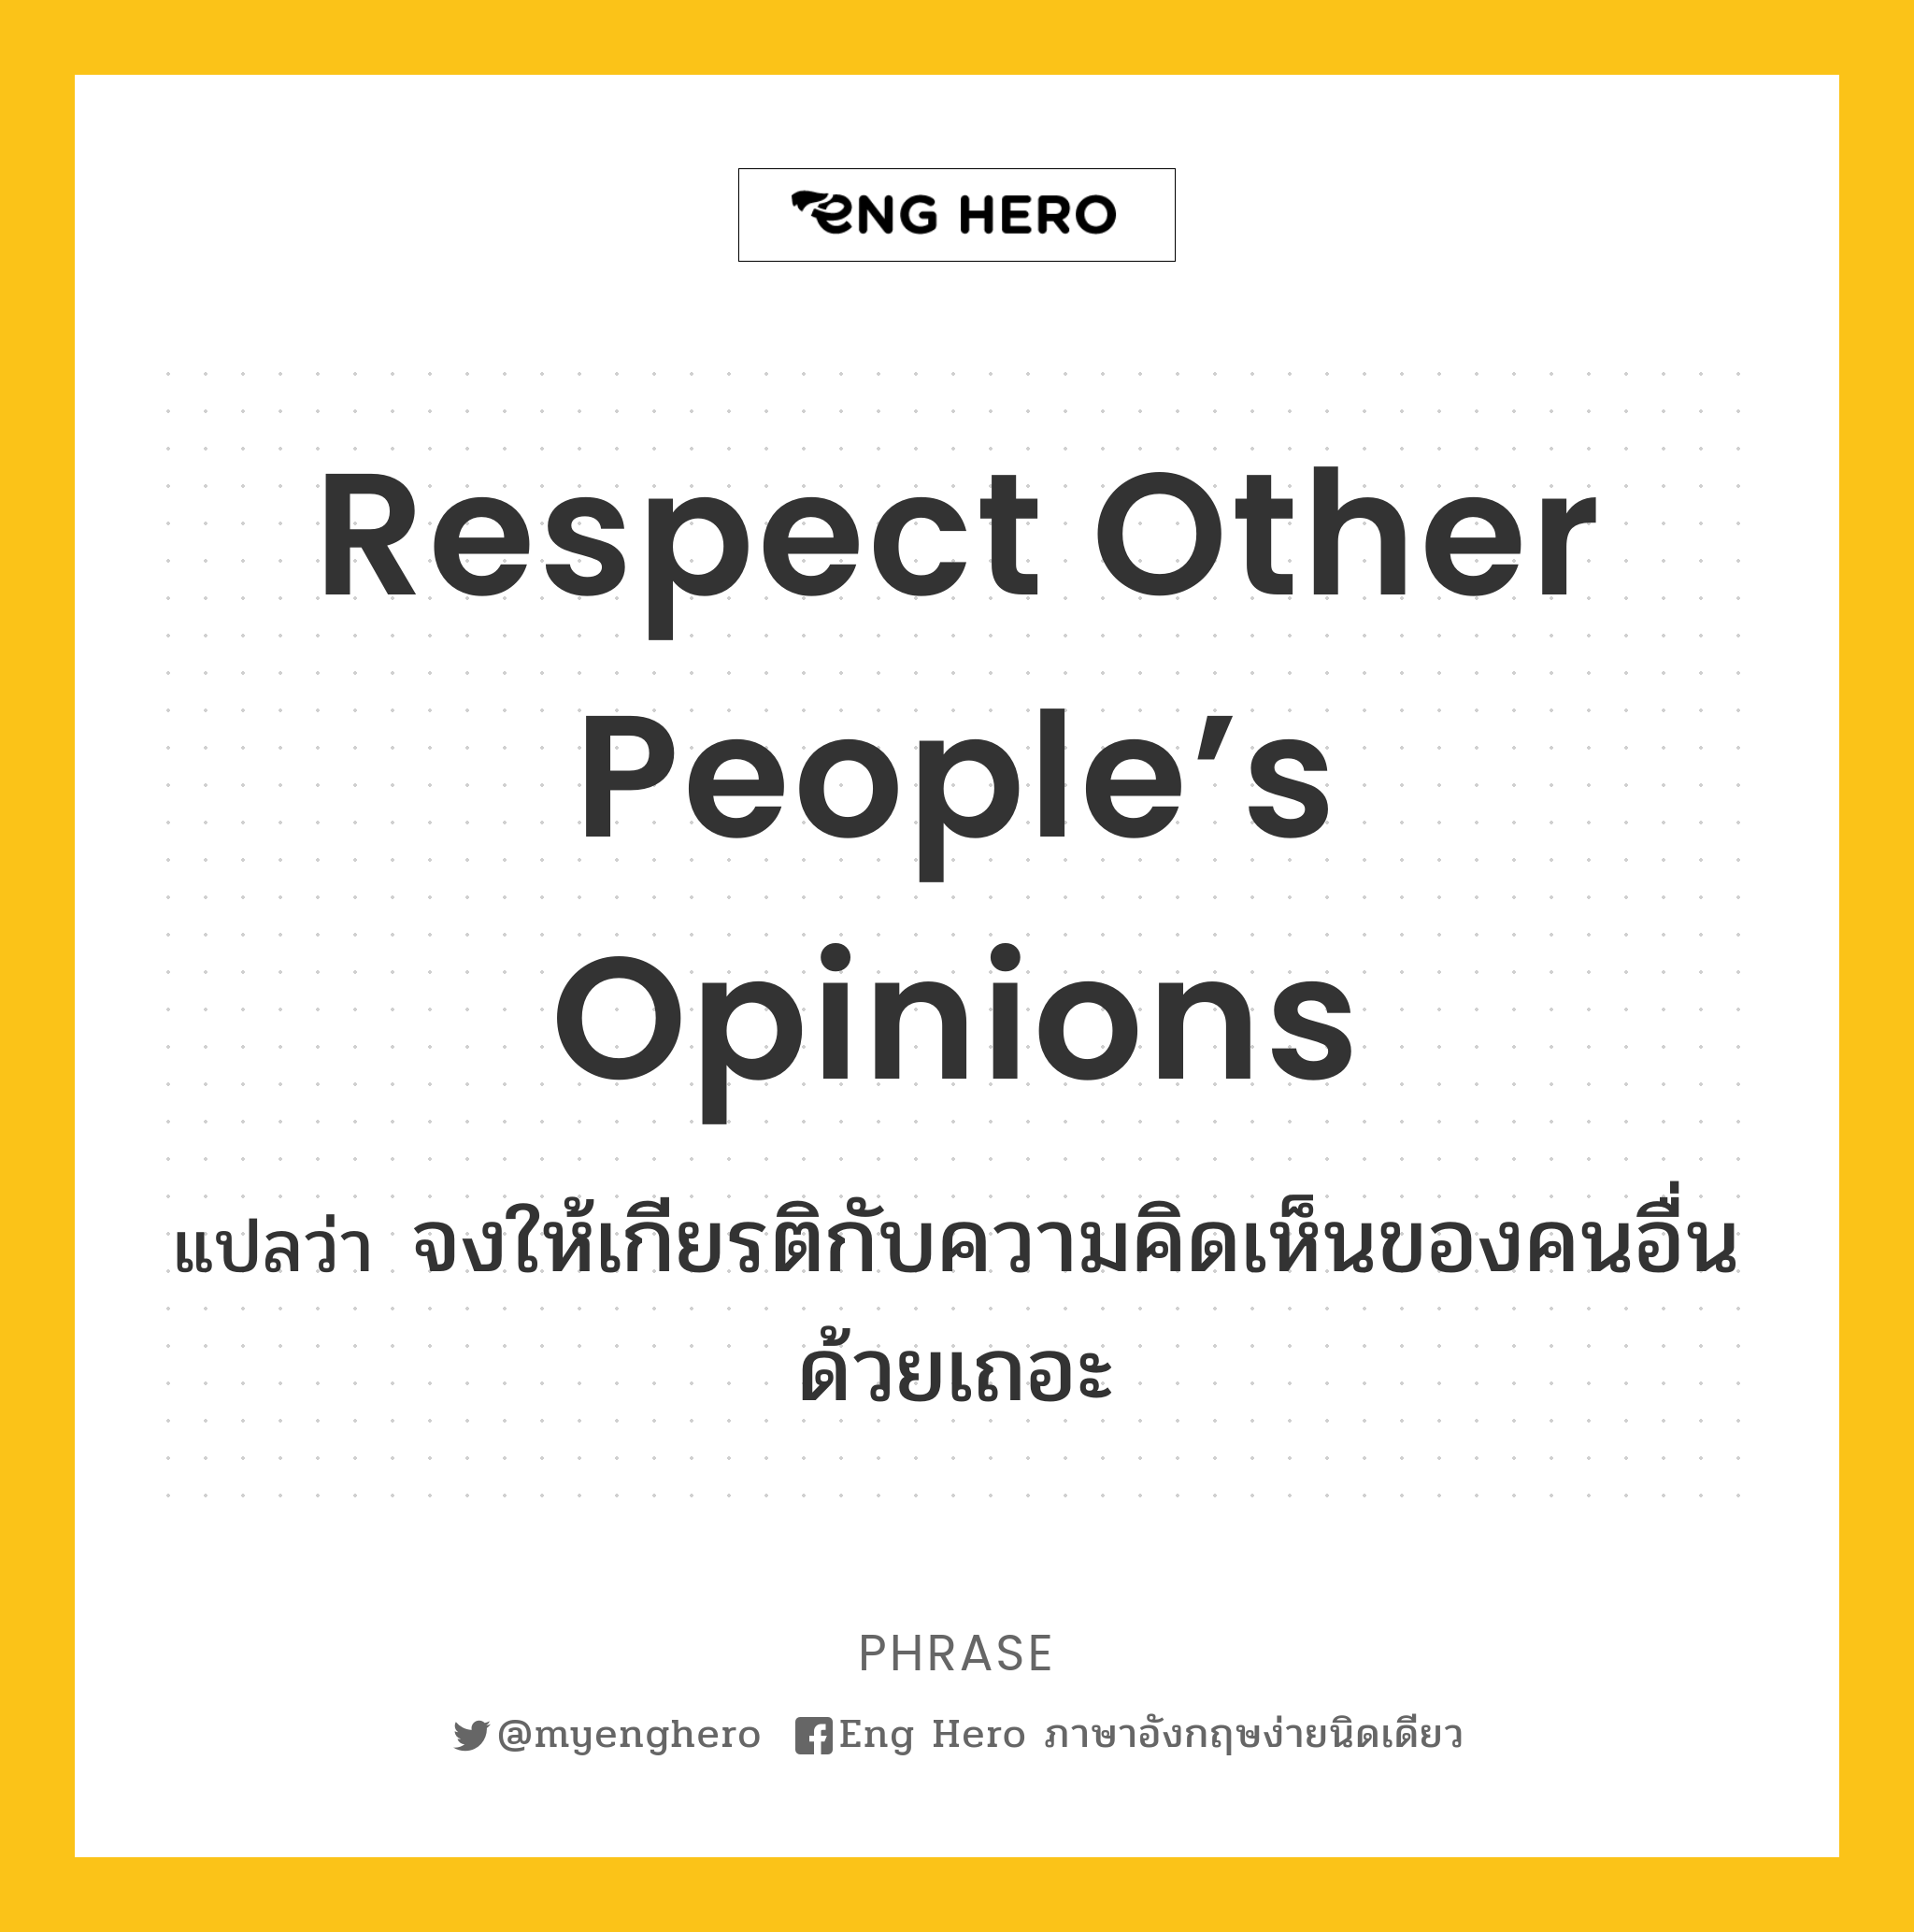 Respect other people’s opinions